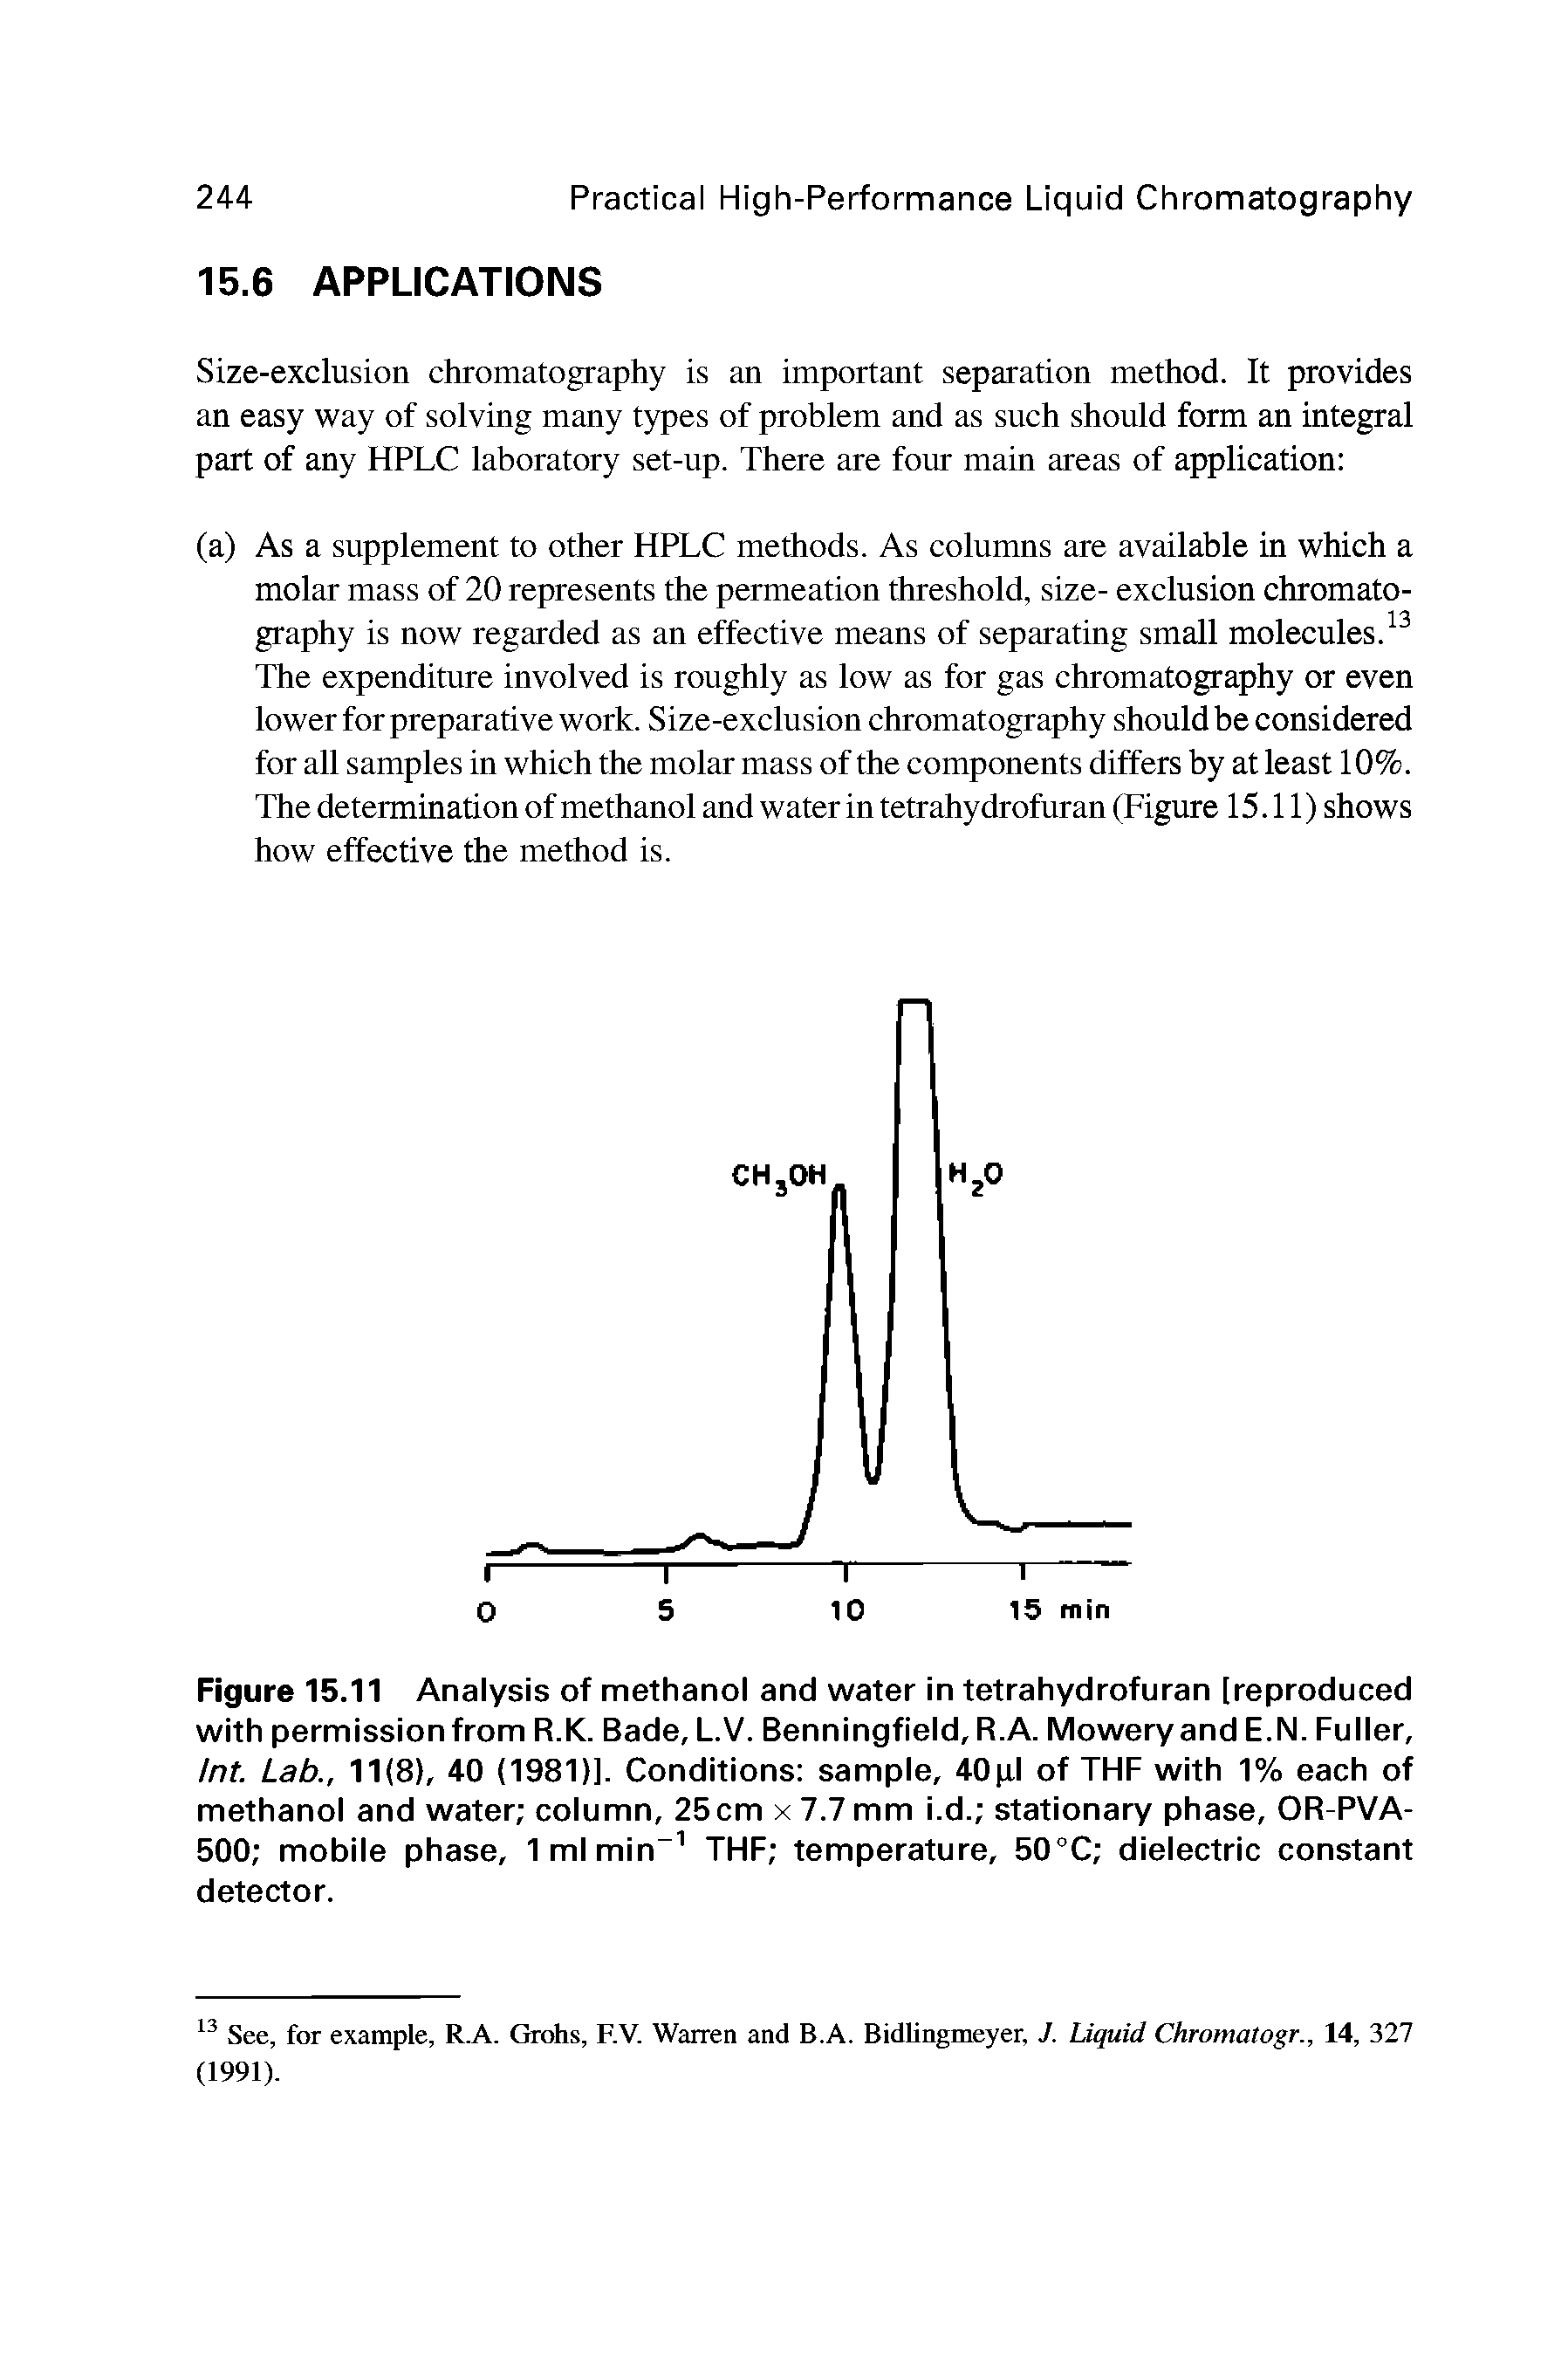 Figure 15.11 Analysis of methanol and water in tetrahydrofuran [reproduced with permission from R.K. Bade, L.V. Benningfield, R.A. Mowery and E.N. Fuller, Int. Lab., 11(8), 40 (1981)]. Conditions sample, 40pl of THF with 1% each of methanol and water column, 25cm x 7.7 mm i.d. stationary phase, OR-PVA-500 mobile phase, Imlmin THF temperature, 5O C dielectric constant detector.